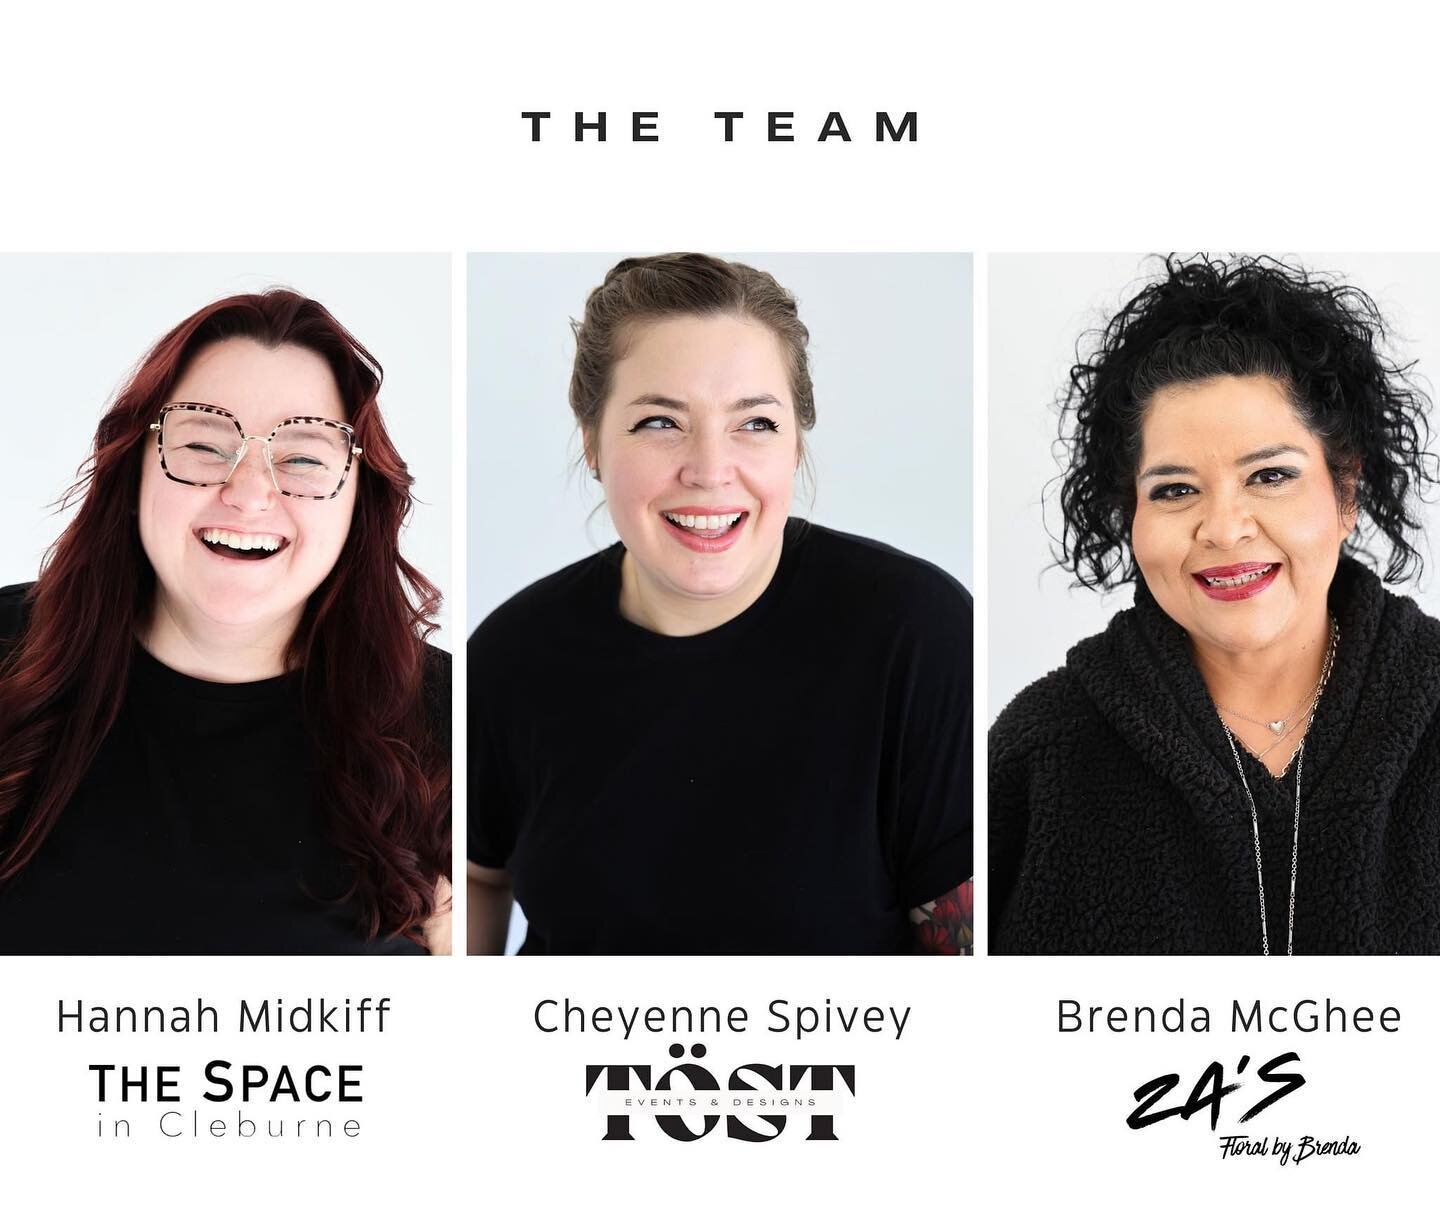 Let&rsquo;s Get Acquainted! Meet the Team Behind Our All-Inclusive Packages! 

At The Space in Cleburne, we believe that behind every successful event is an exceptional team dedicated to making magic happen! ✨ Today, we&rsquo;re excited to introduce 